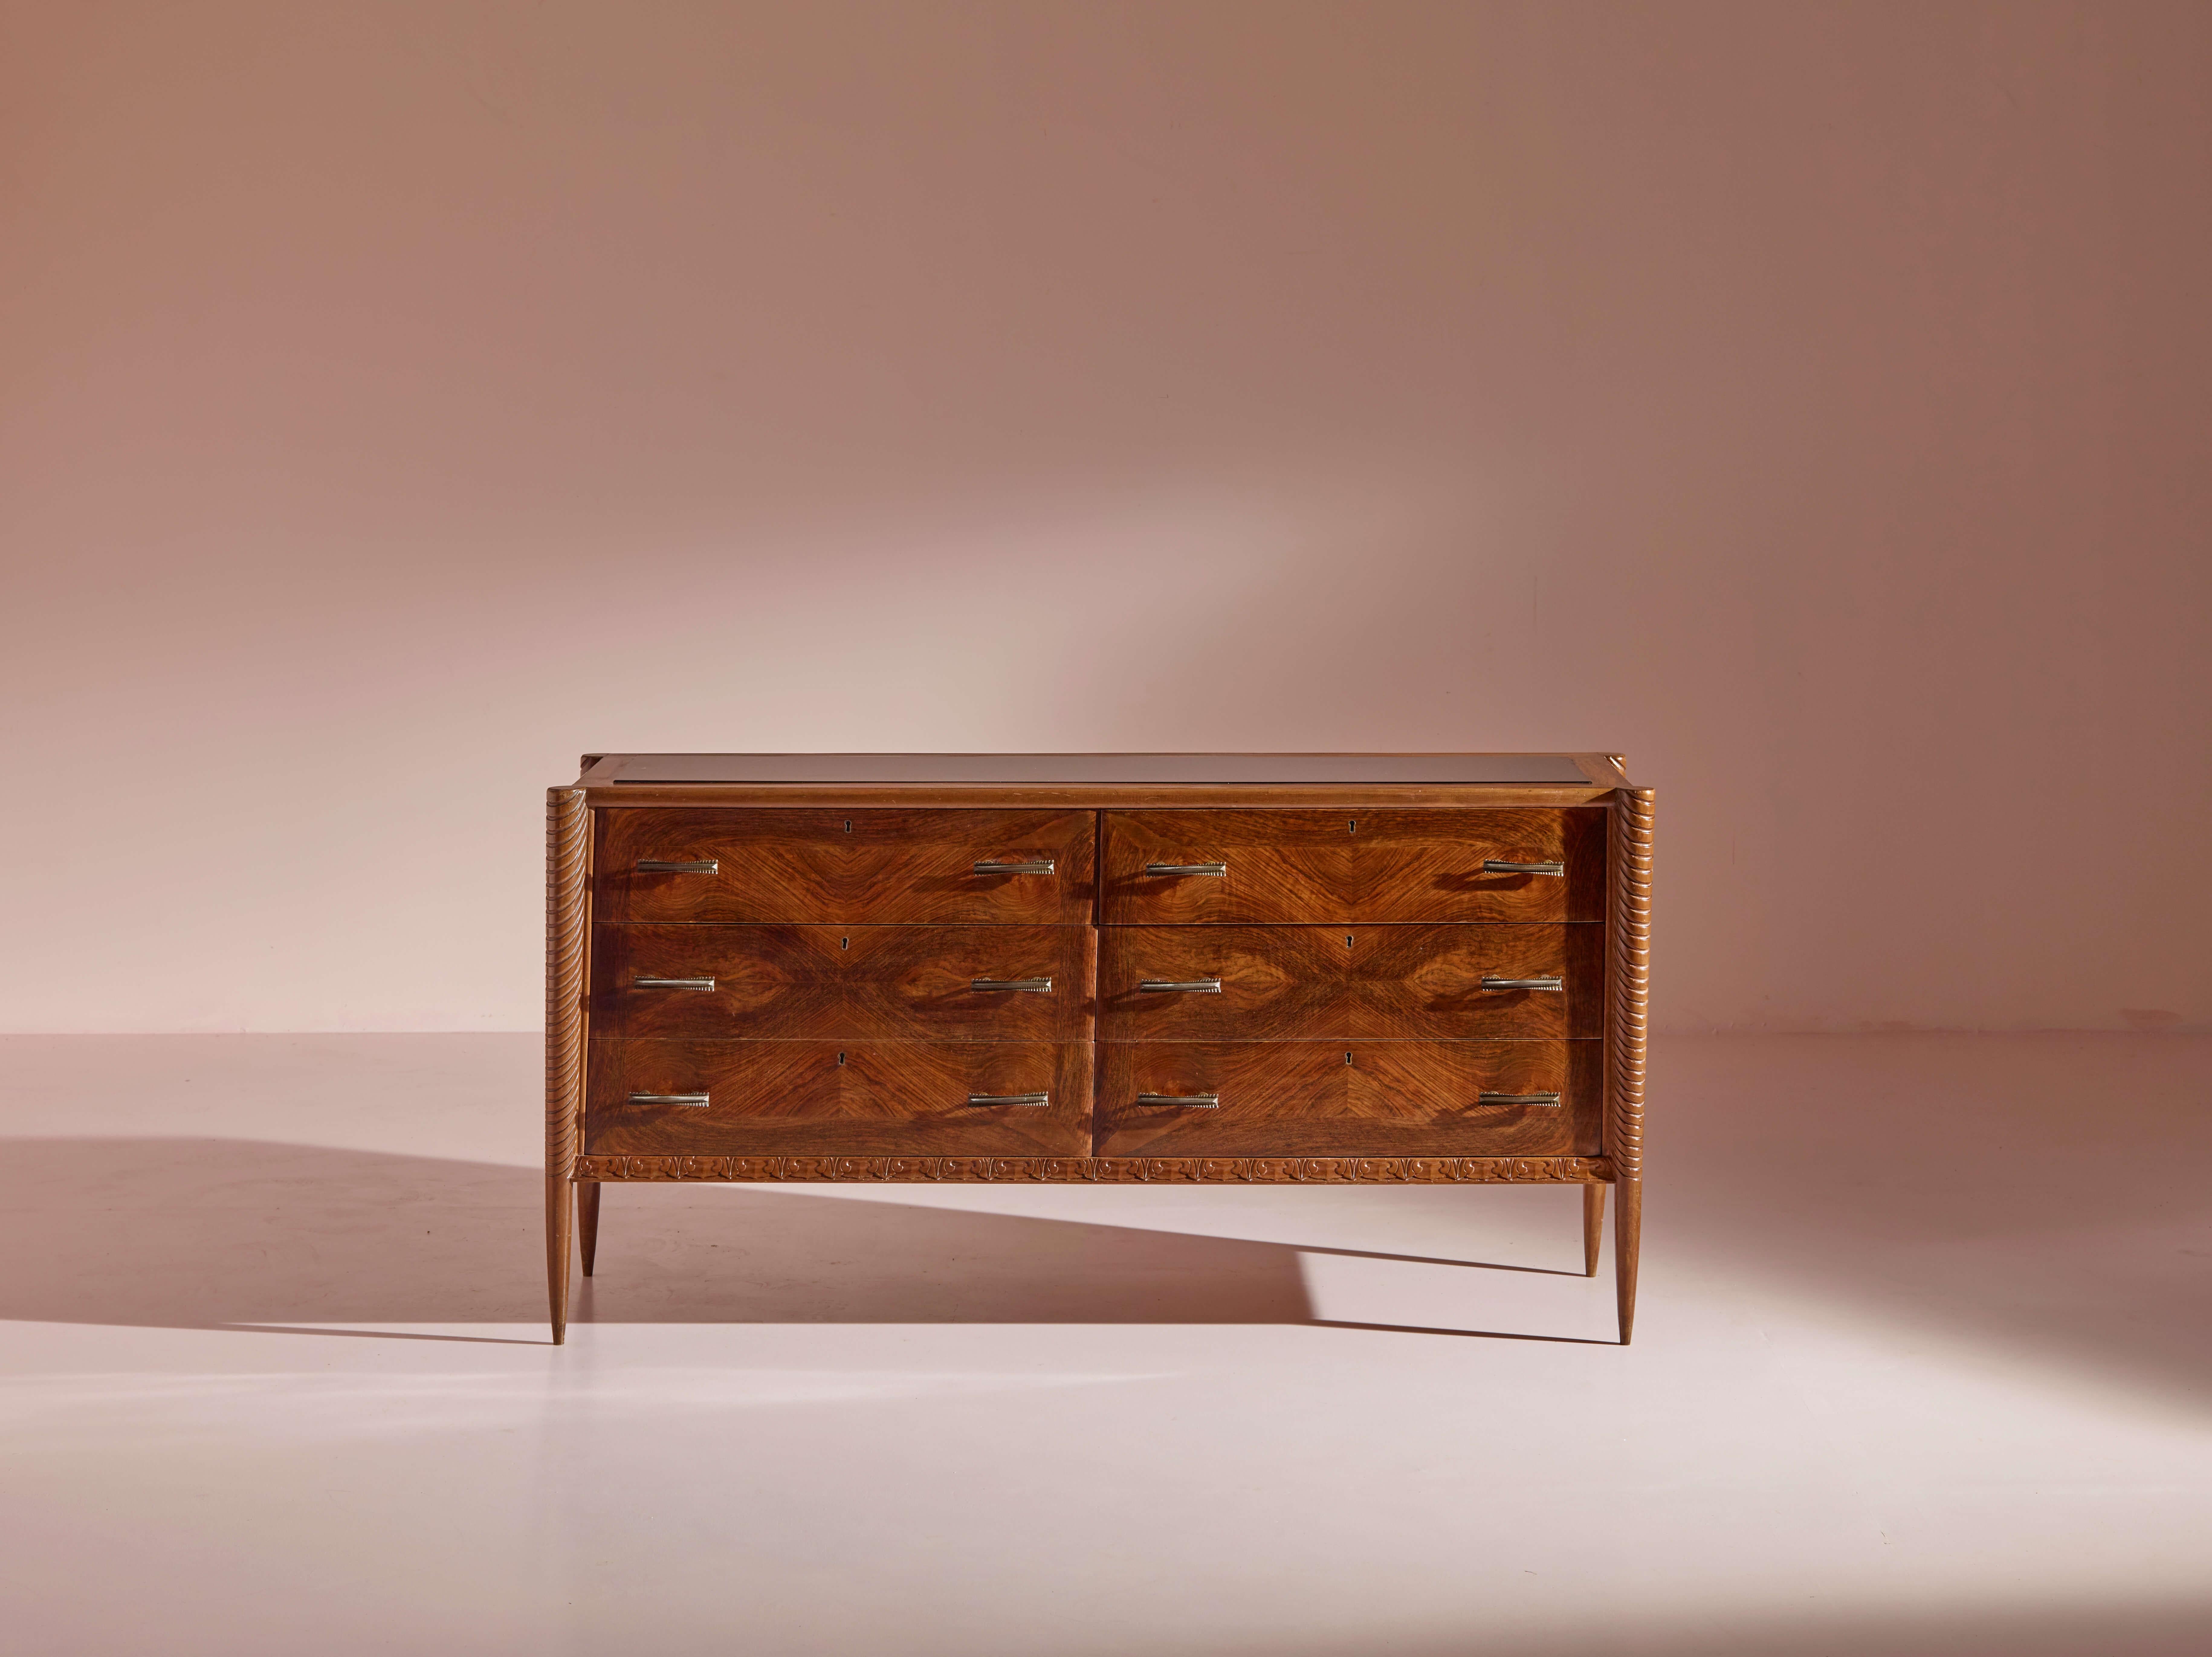 A rare and beautiful mid-century modern Italian chest of drawers, crafted in the style of Paolo Buffa, stands as a testament to the timeless elegance of 1940s Italian design. Made from rich African walnut, this exquisite piece exudes a sophisticated